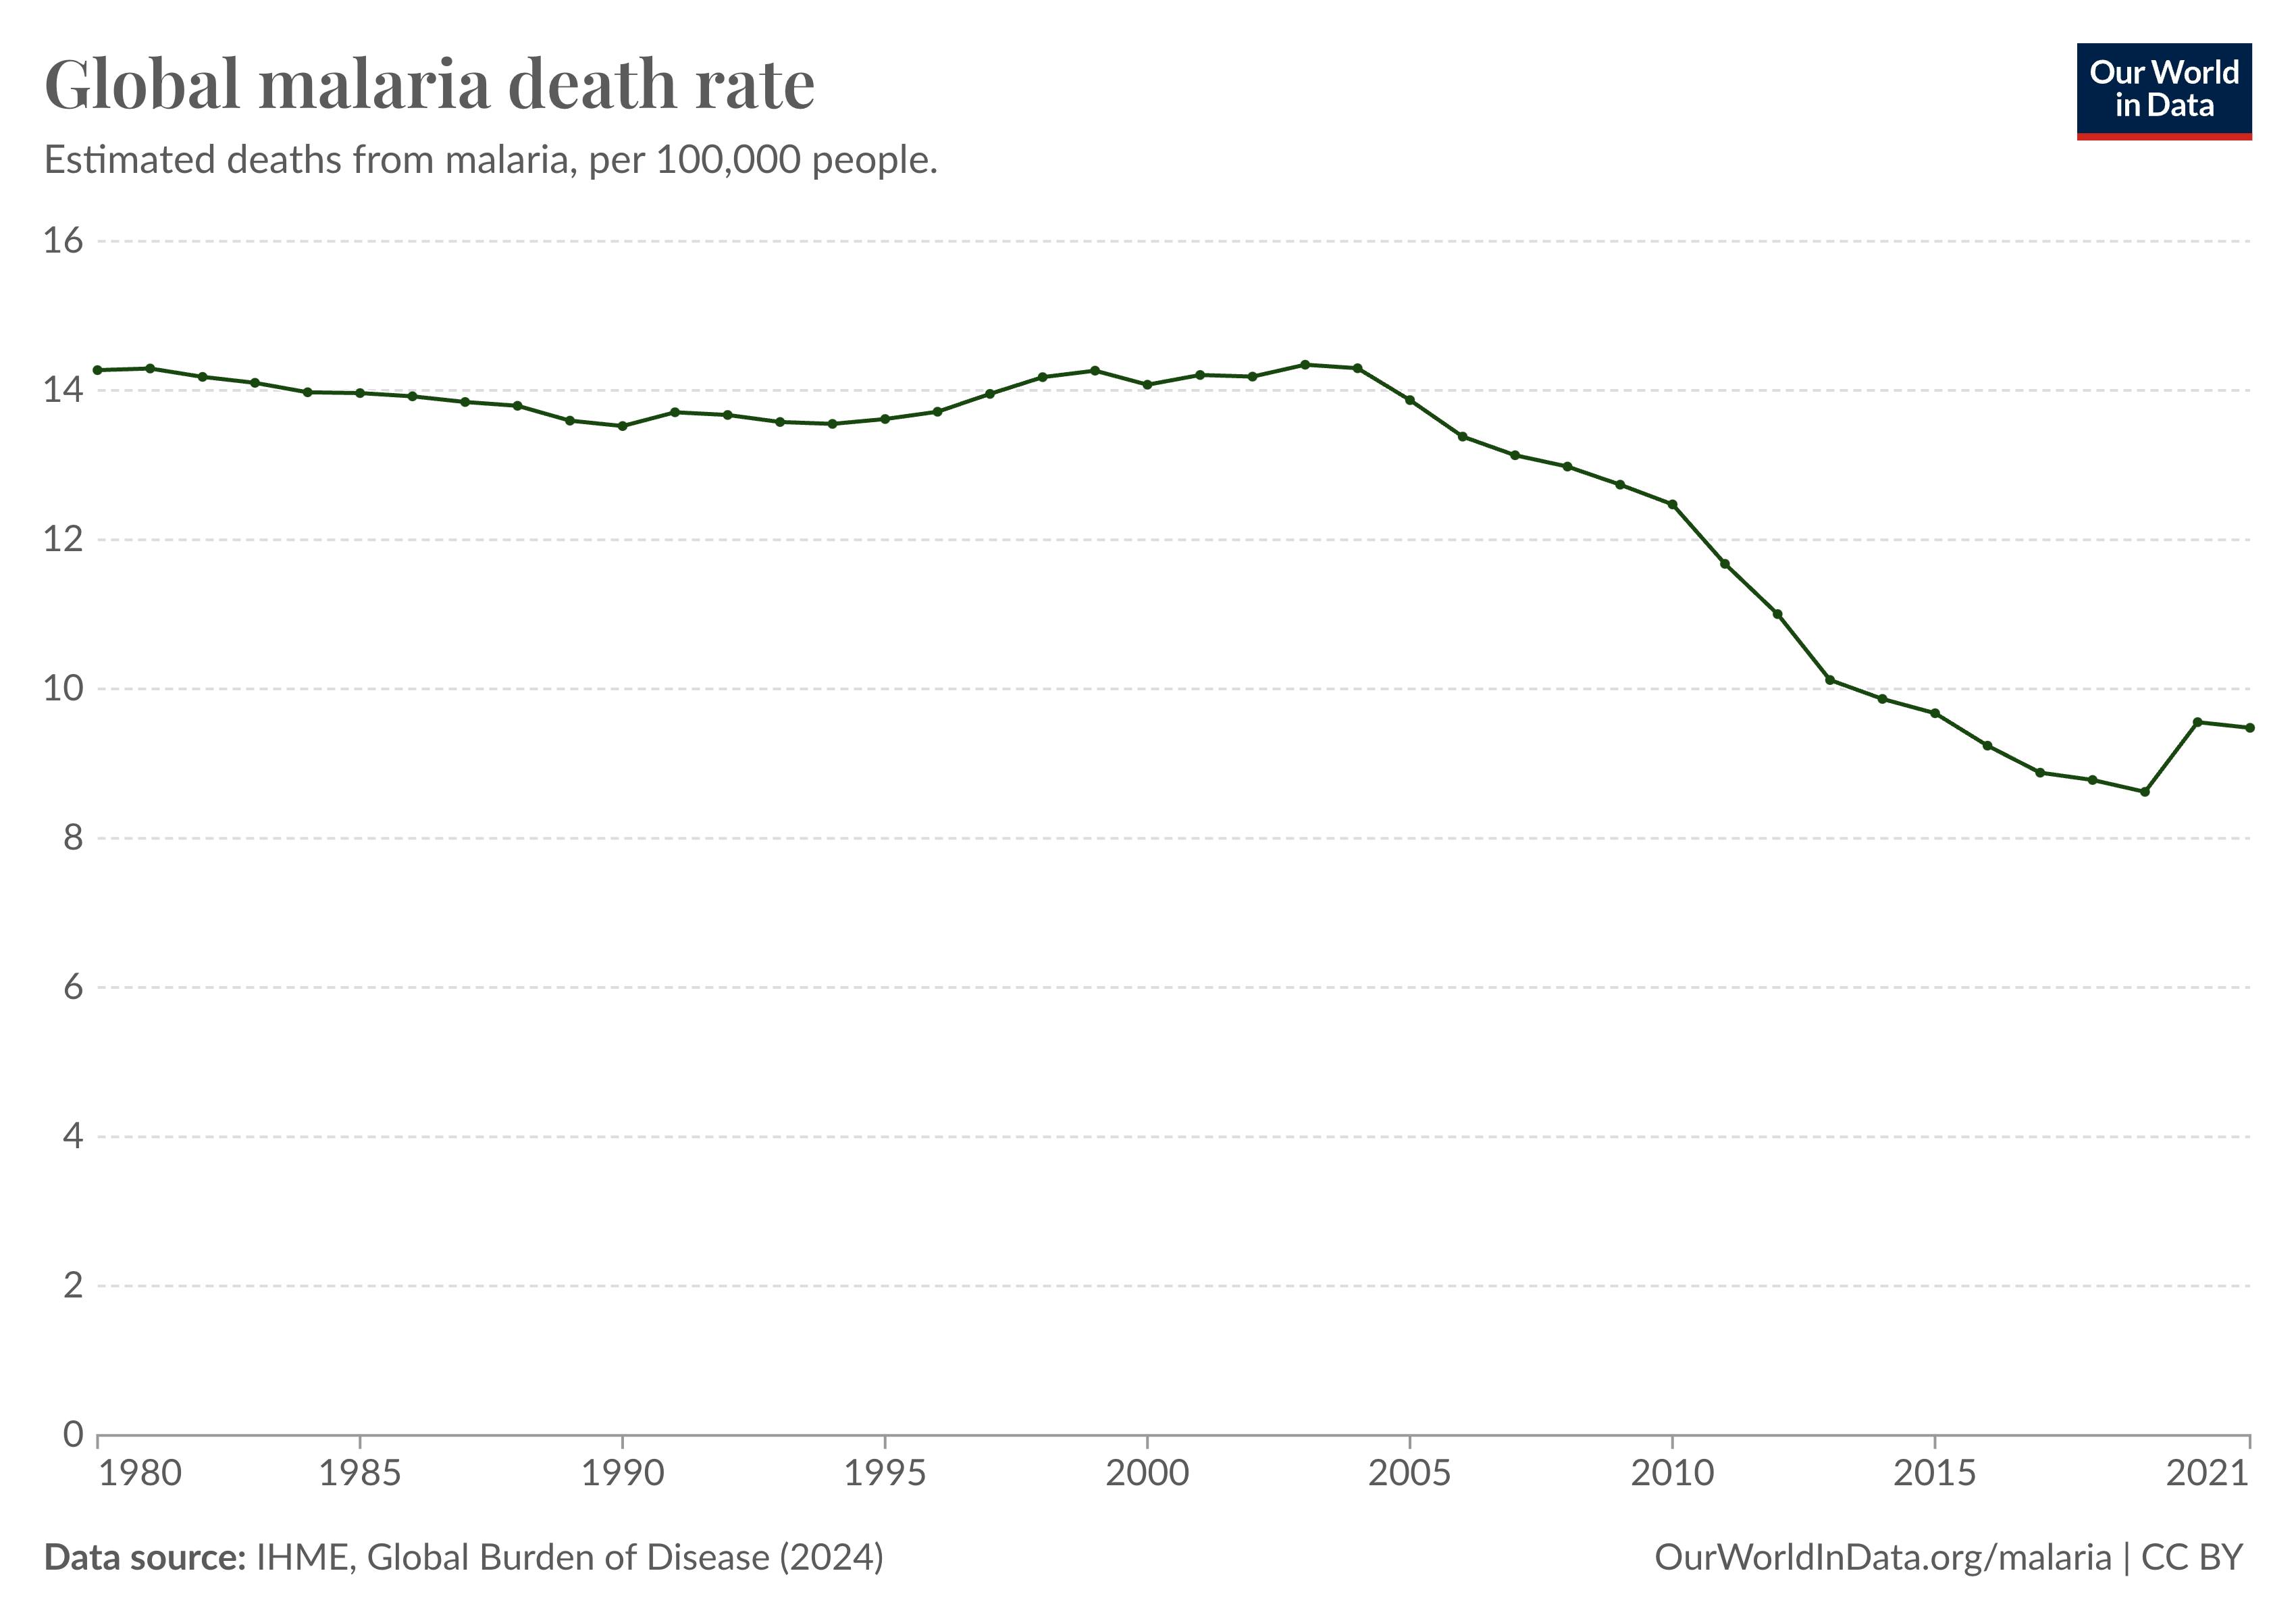 "Line graph showing the estimated deaths from malaria per 100,000 people from 1980 to 2021. The graph starts at around 12 deaths per 100,000 people in 1980, rises to a peak of about 15 deaths per 100,000 people around 2004, then gradually declines to about 9 deaths per 100,000 people by 2019. After 2019, the rate rises again to approximately 10 deaths per 100,000 people by 2021. Data source: IHME, Global Burden of Disease (2024)."